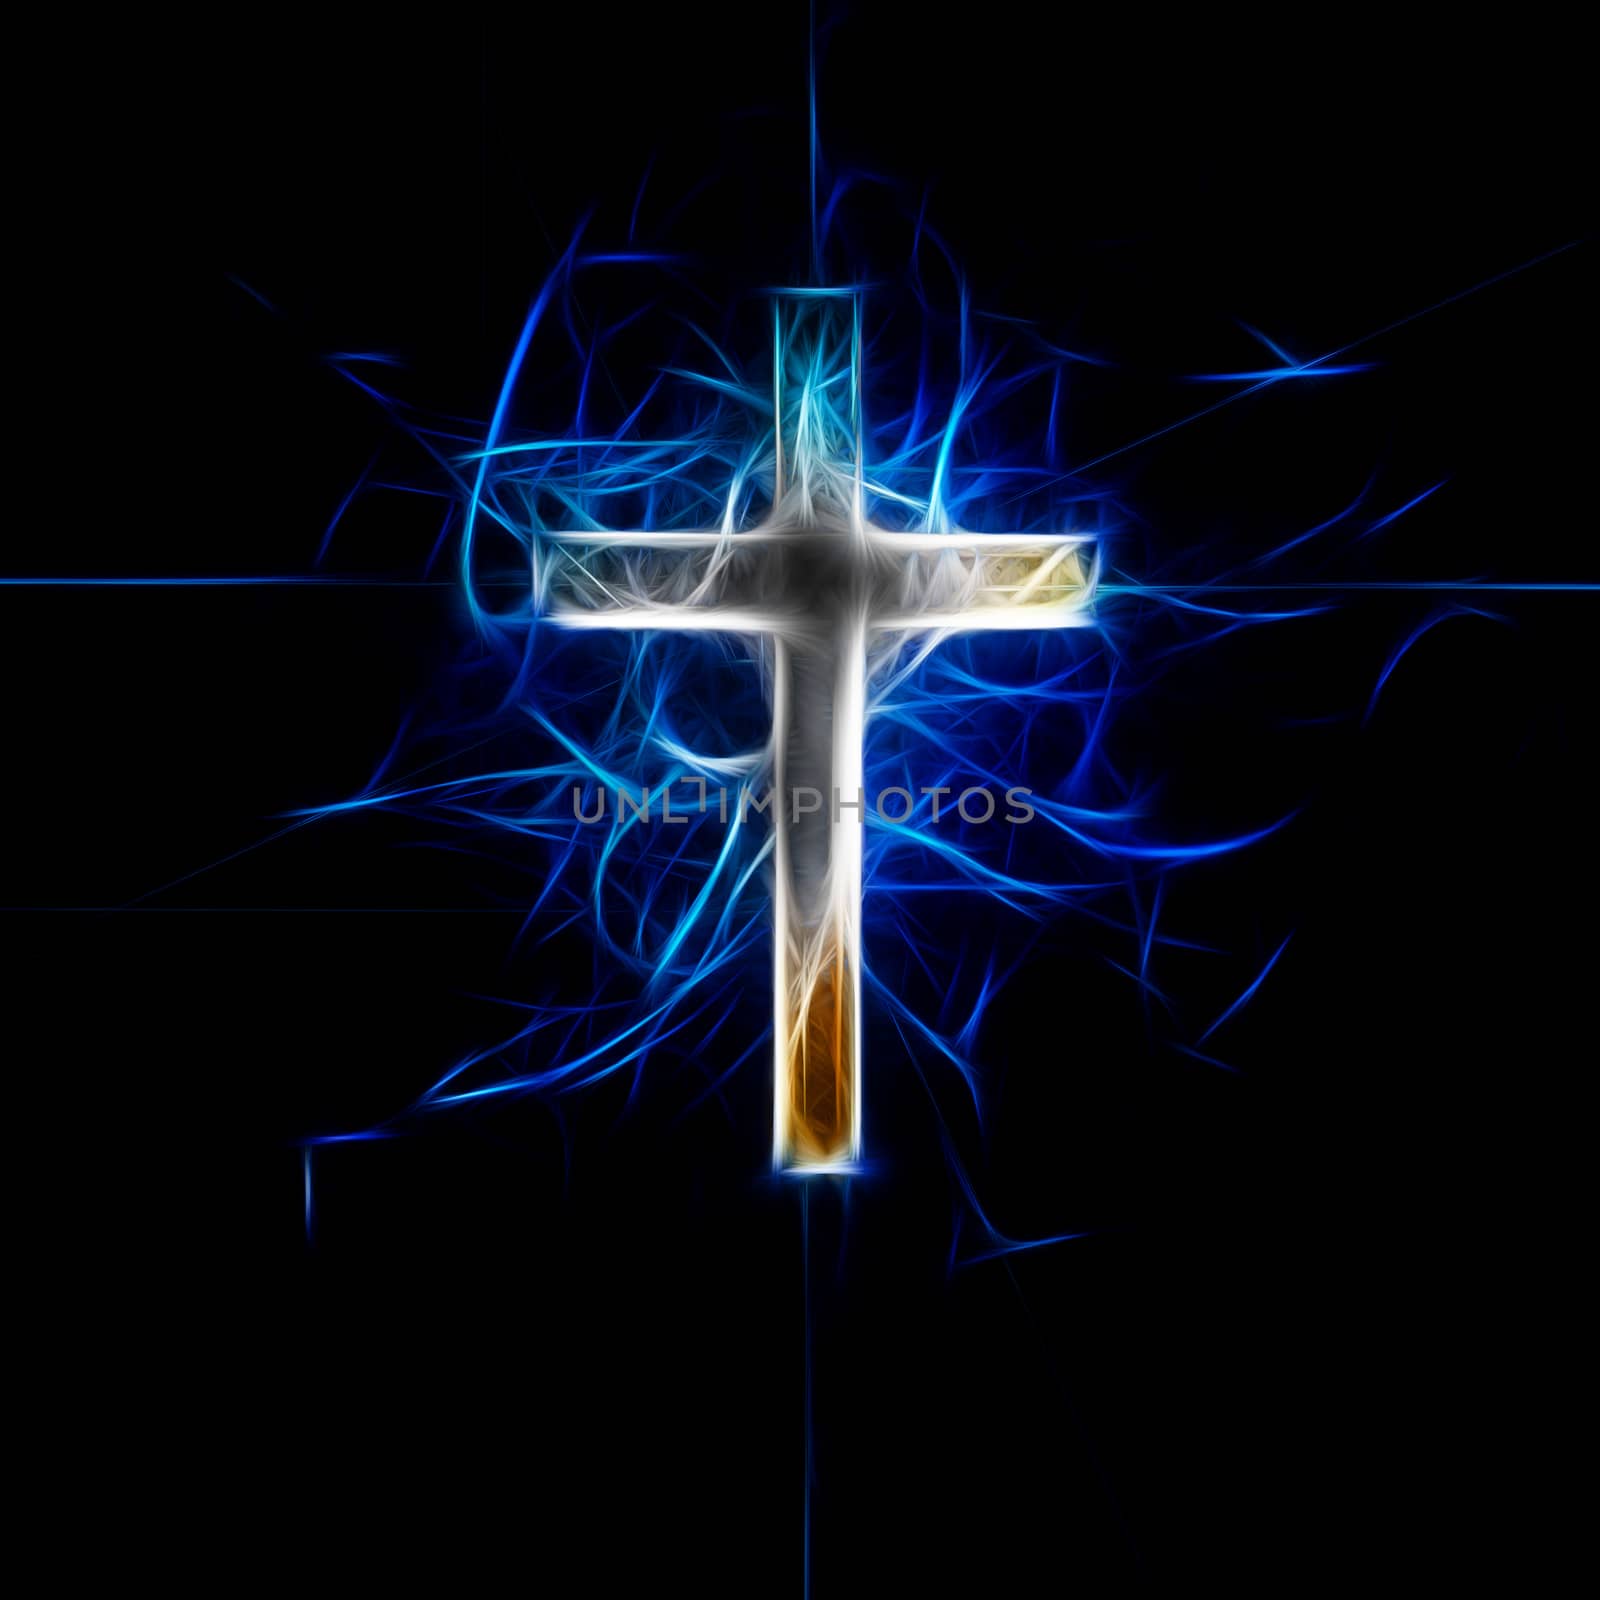 Cross on Abstract blue background